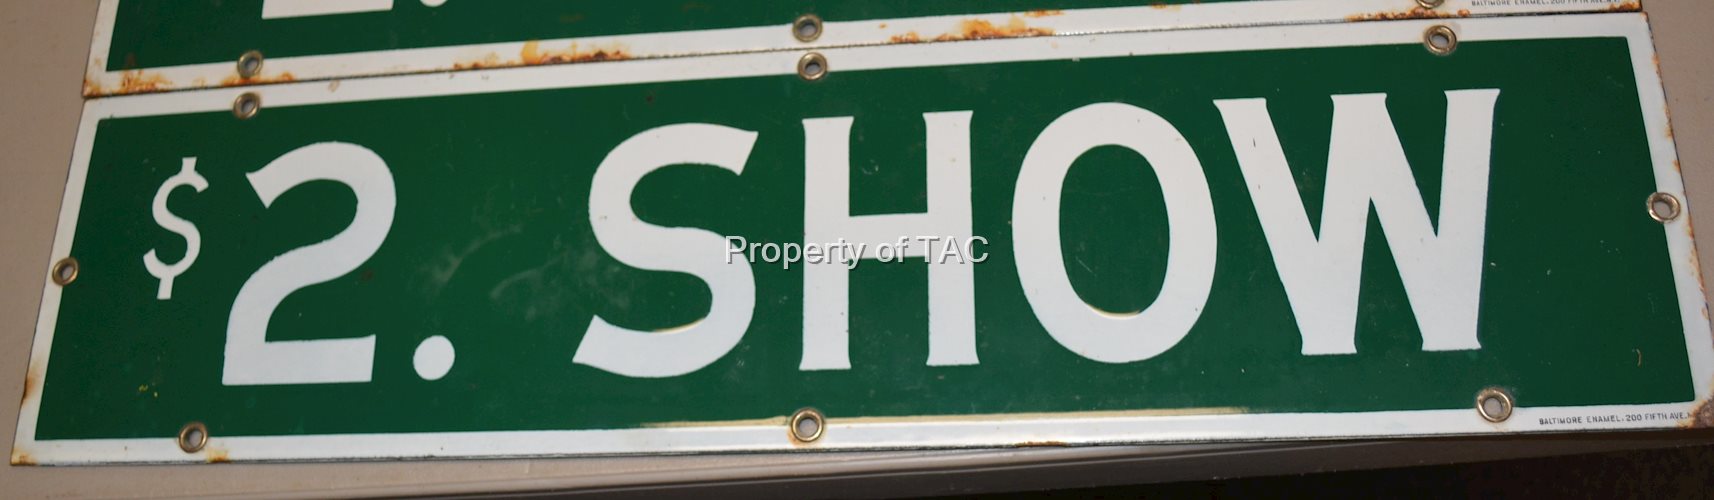 $2 Show Horse Track Betting Porcelain Window Sign